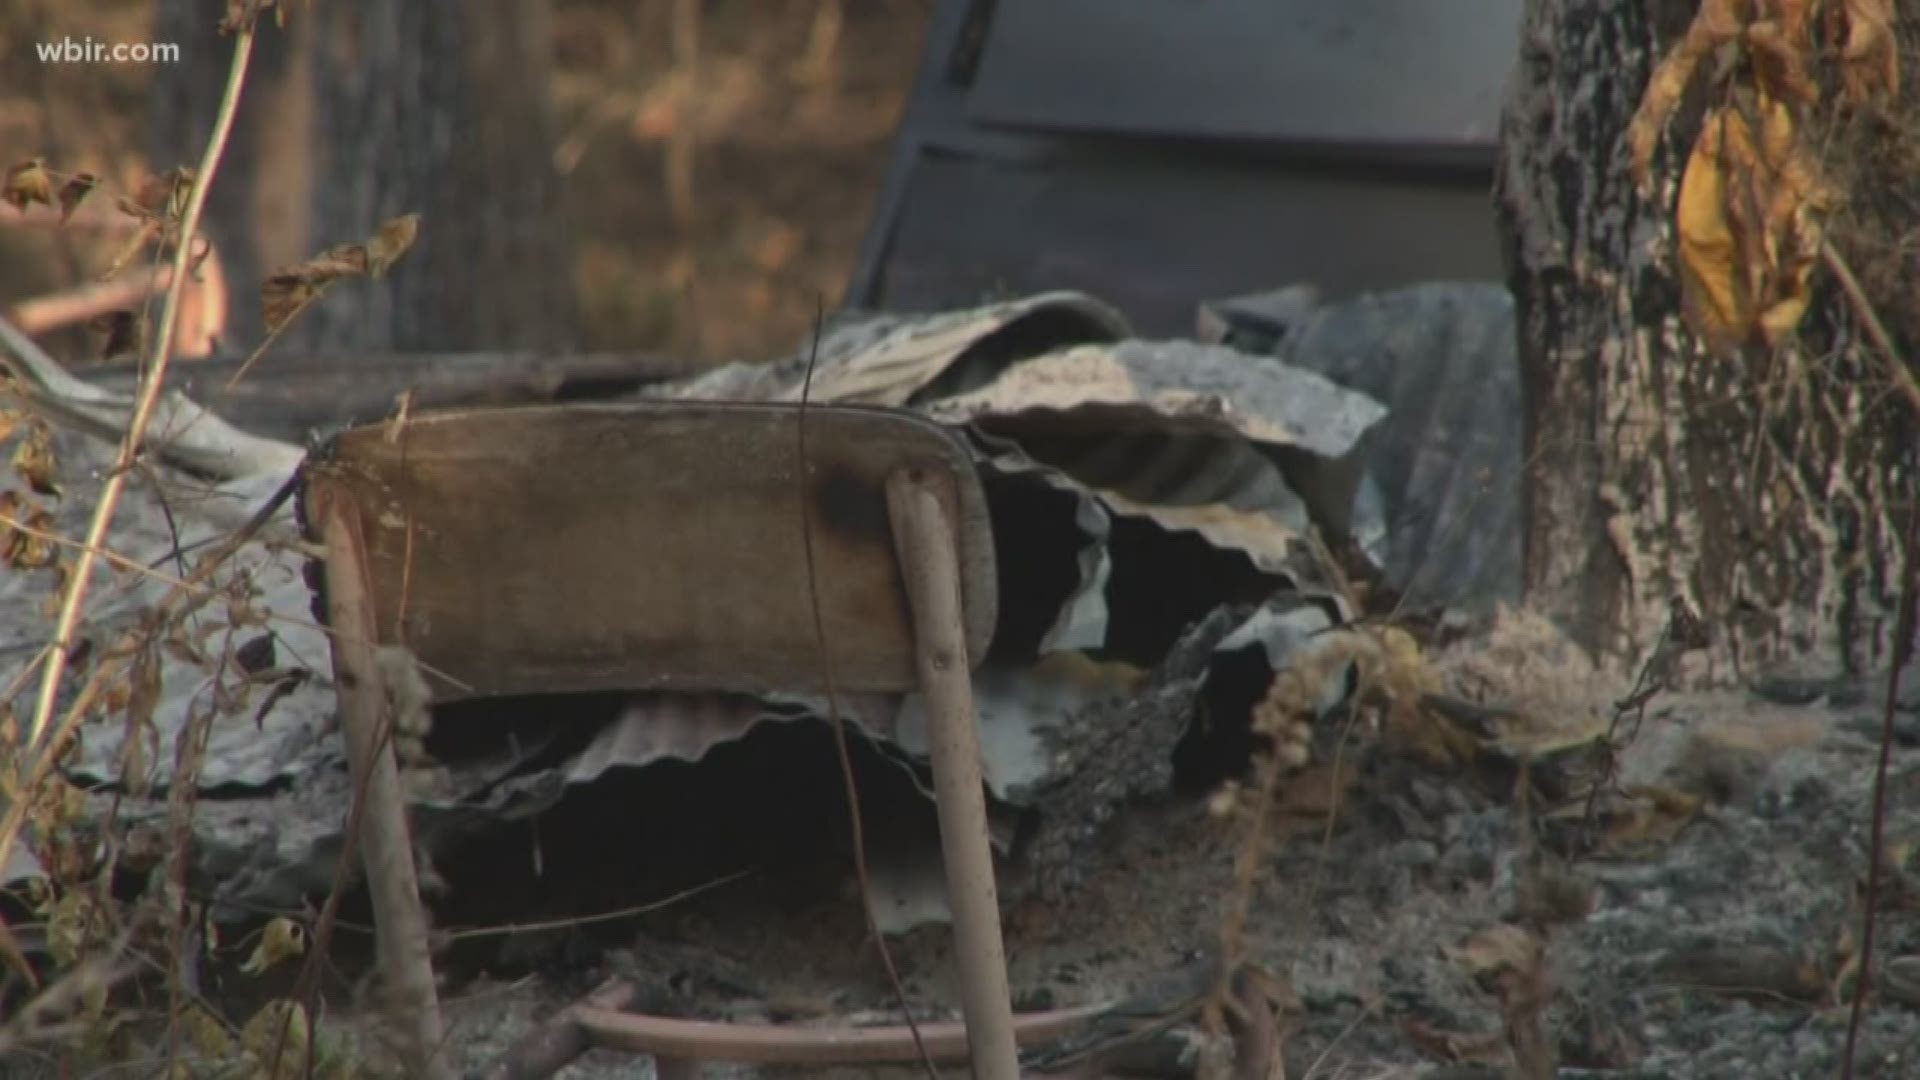 The Cumberland Co. fire dept. said the cause of the fire that destroyed the famous minister's treehouse is undetermined, and it has no plans to further investigate.